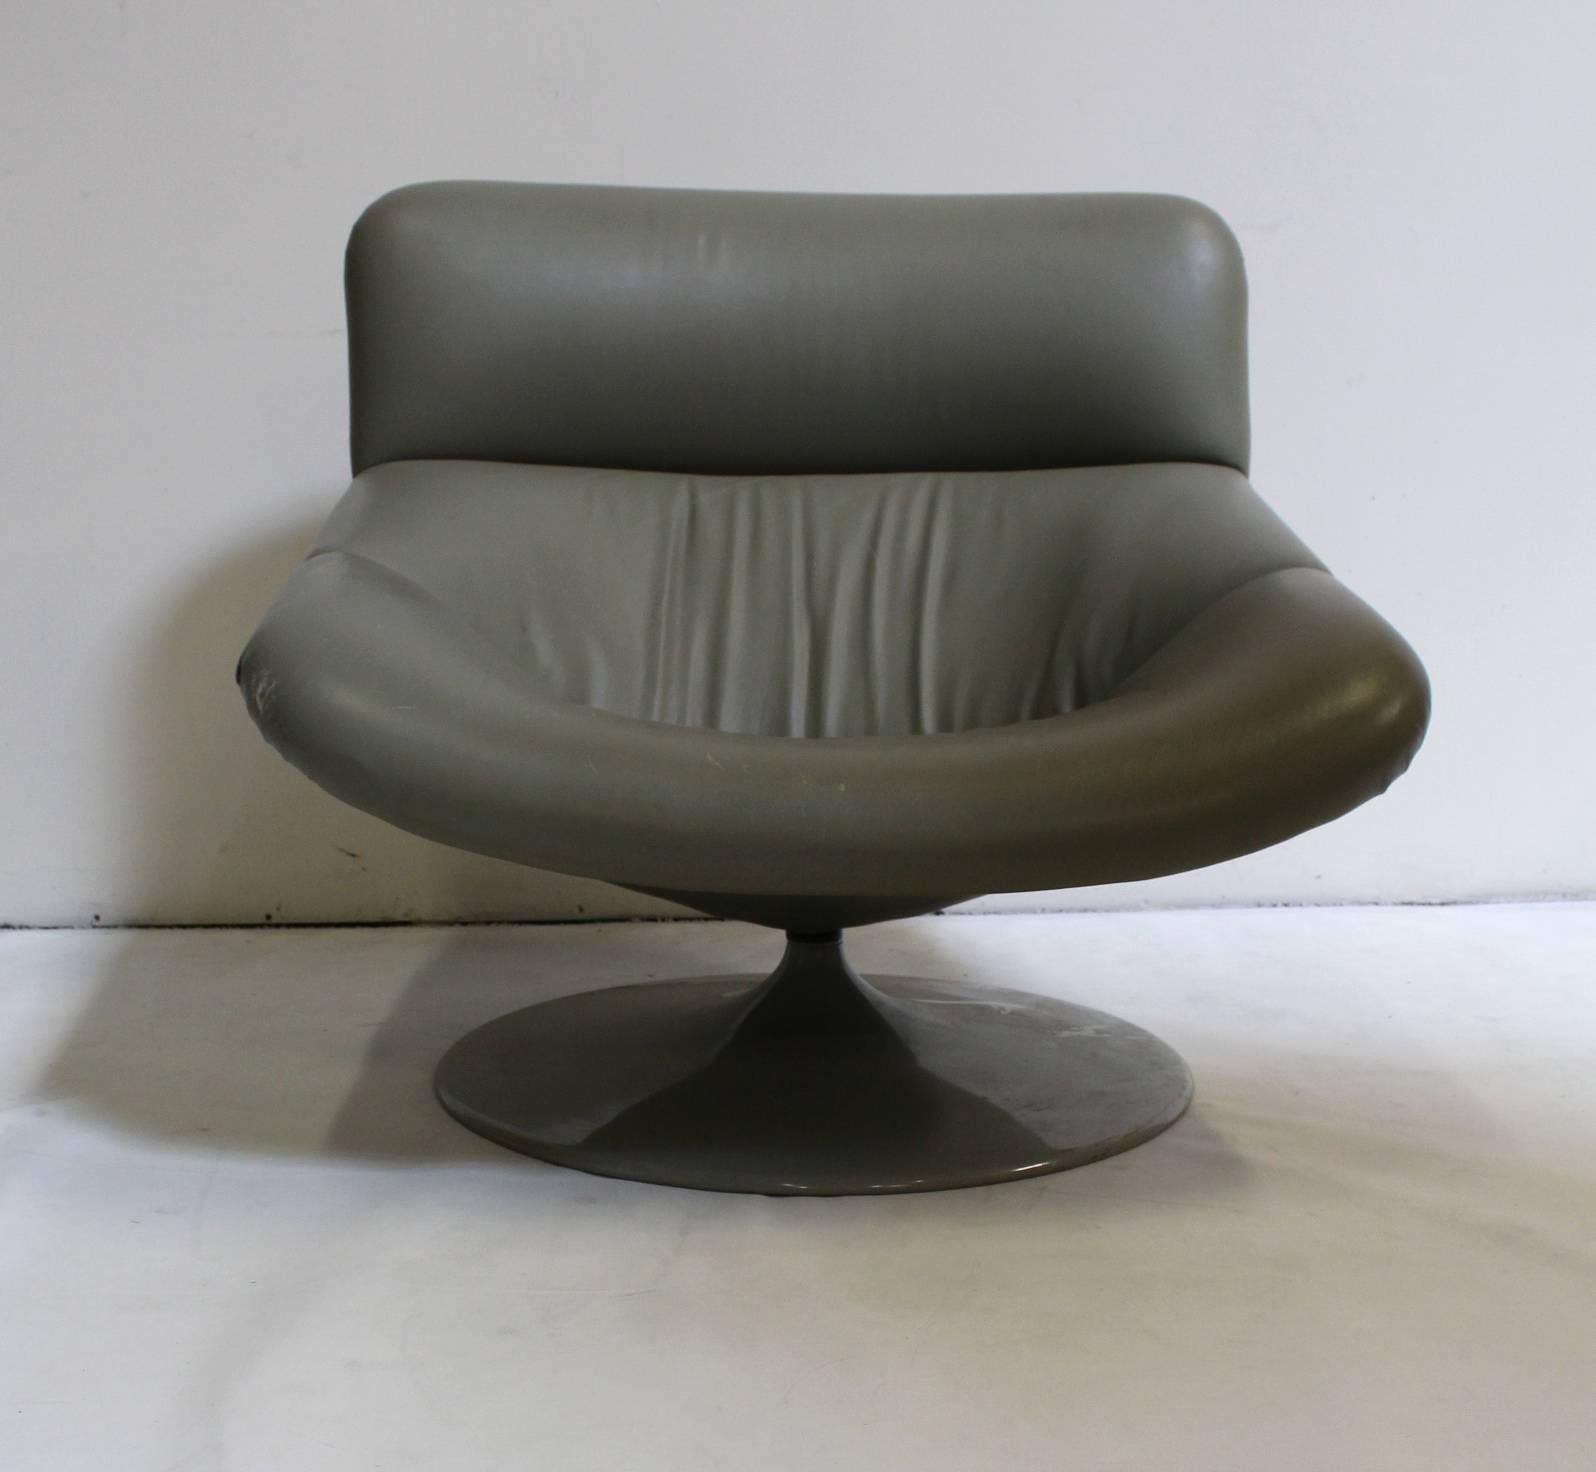 Modern, designer swivel lounge chair. Model F518, Artifort, 1974. Leather, enameled metal. Very stylish, comfortable, and solidly built. Quality leather and craftsmanship.

Has a few small holes and wear marks to the front leather and a tear in